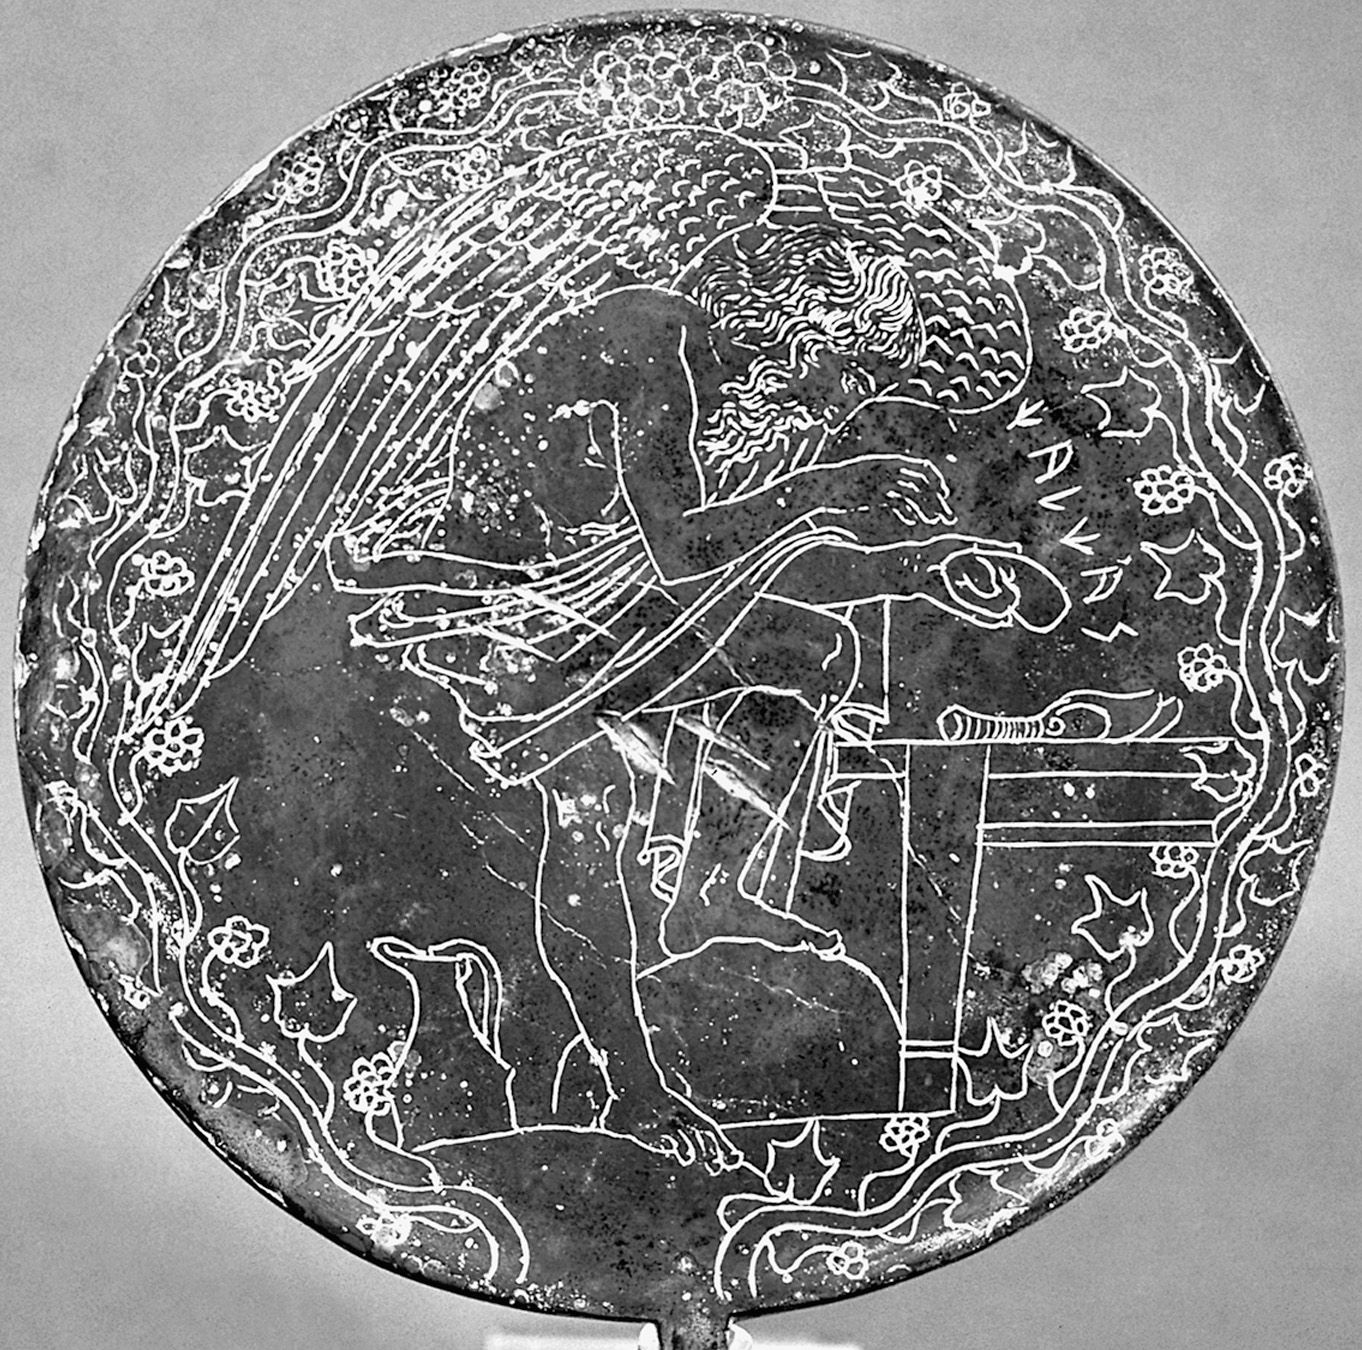 <p>-examining the liver of this sacrificed animal -highly spiritual figure with wings (not an angel) -Etruscans were extremely religious, very devout, superstitious -Researched flight of birds, thunderstorms -Priests were very powerful -Woman owned this mirror</p>